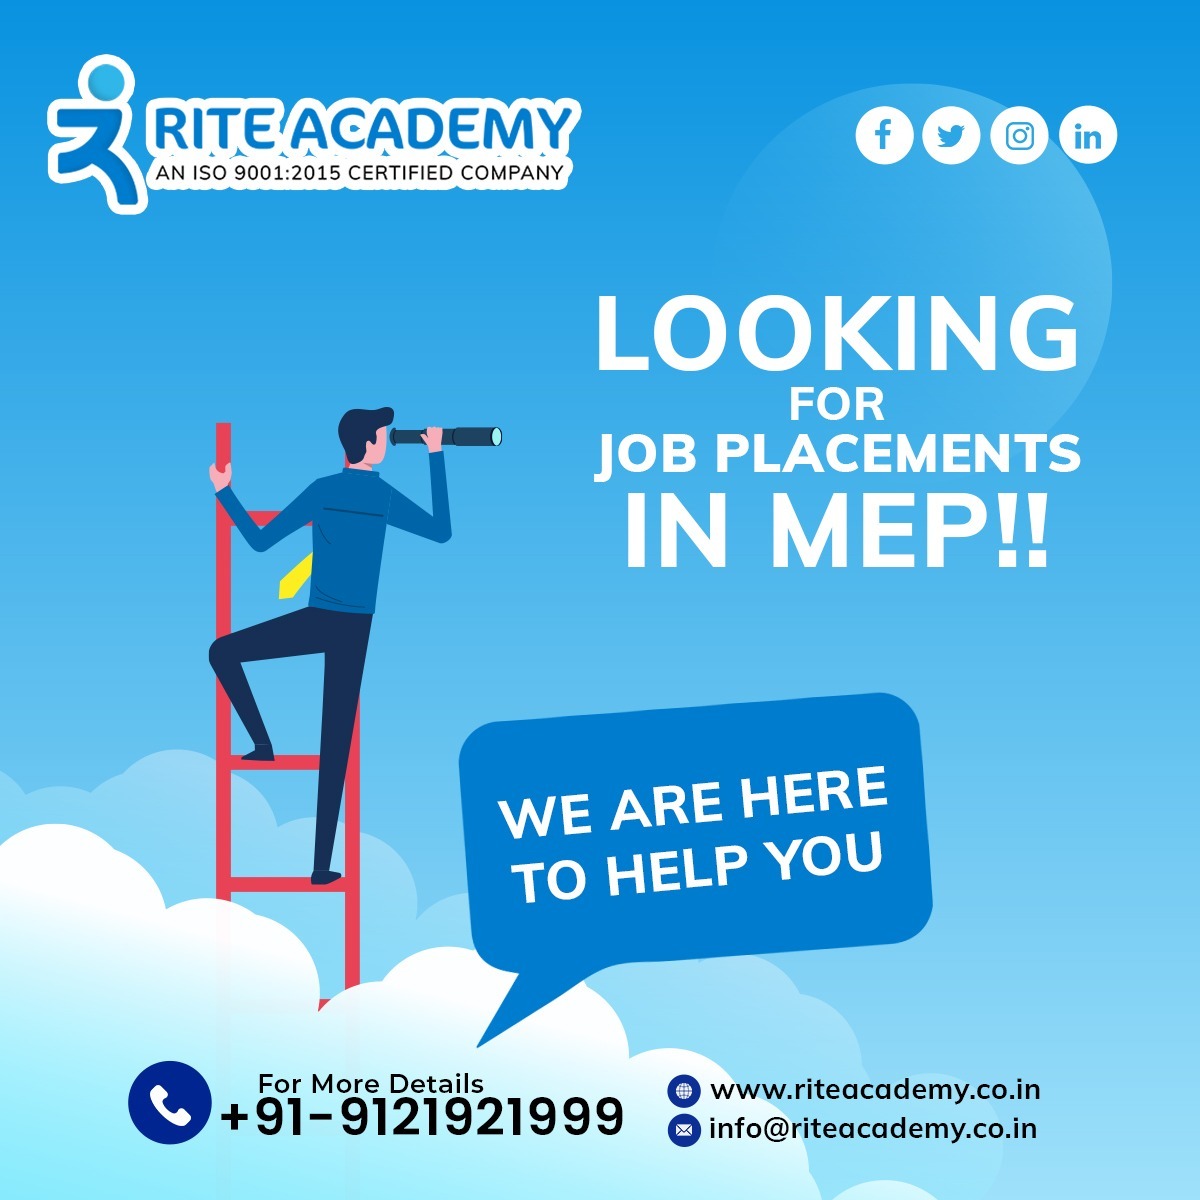 👷‍♀️ Seeking MEP #JobPlacements? Look no further than RITE Academy! 🏢👷‍♂️

🔎 Unlock your career💼 potential in #MEP with #RITEAcademy's top-notch job placement assistance. Join us today and pave the way for a successful career in the #Mechanical, #Electrical, and #Plumbingindustry